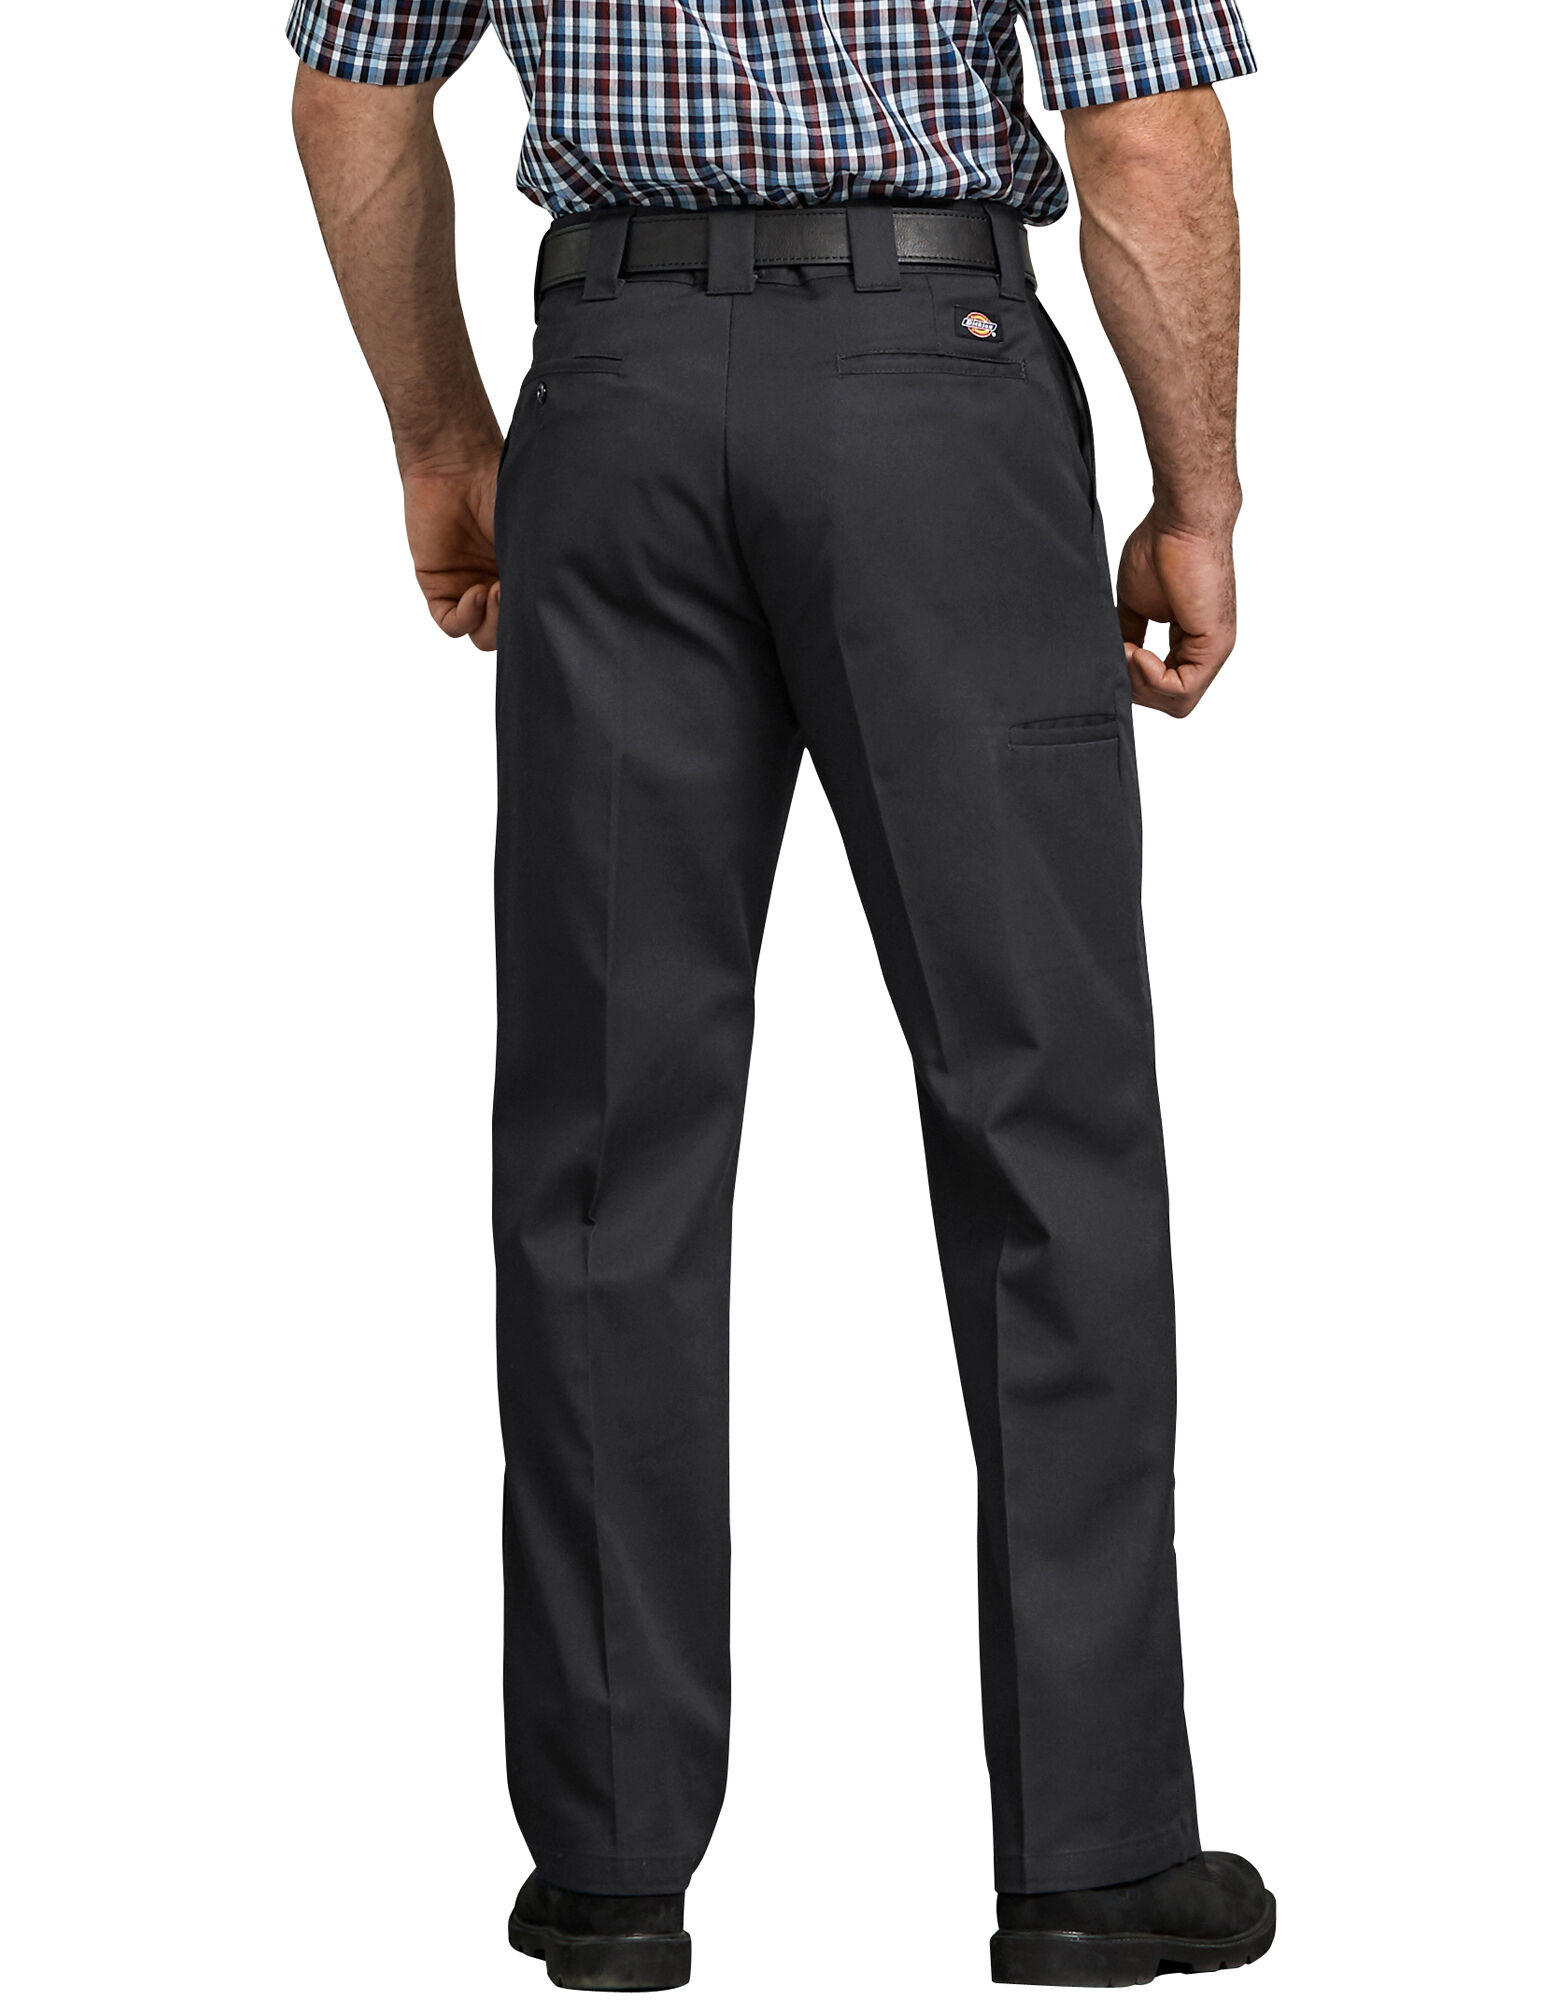 Flex Relaxed Fit Straight Leg Twill Work Pants Men S Pants Dickies